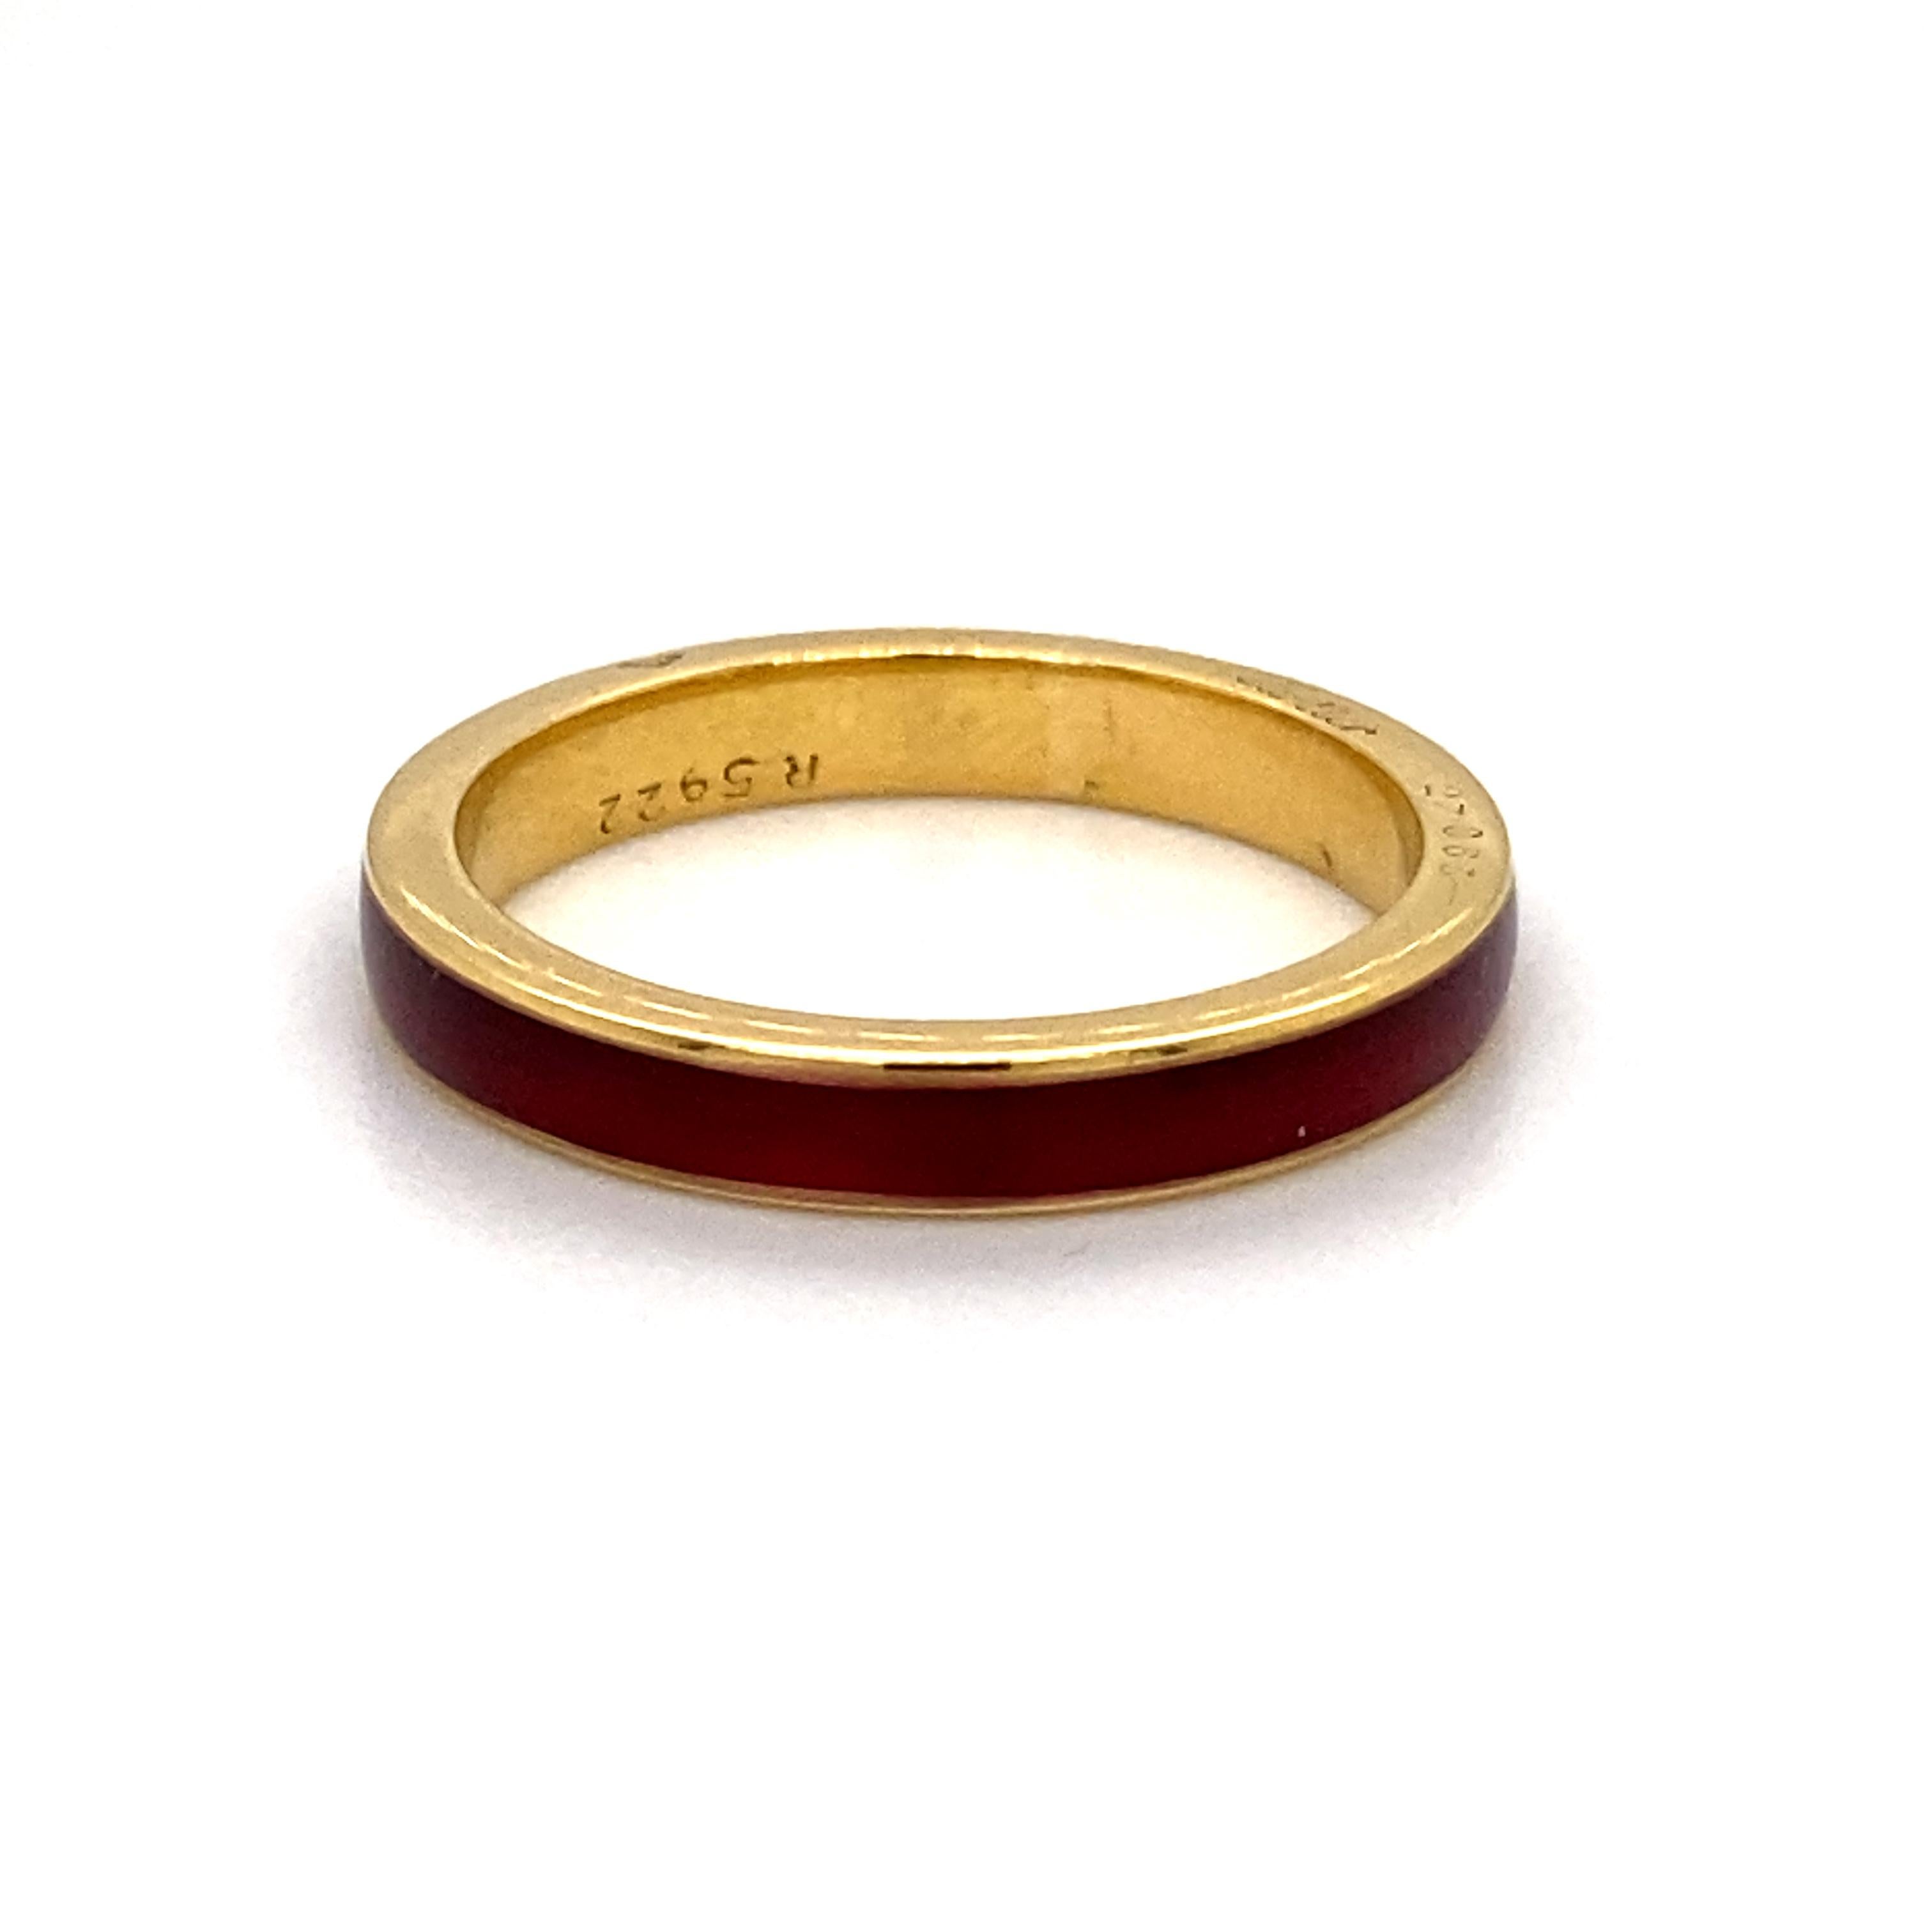 A vintage Cartier red enamel 18 karat yellow gold band, circa 1960.

Designed as a simple 18 karat yellow gold band with a ring of deep red guilloche enamel to its centre.

A beautifully elegant ring, that can be worn on its own or as part of a